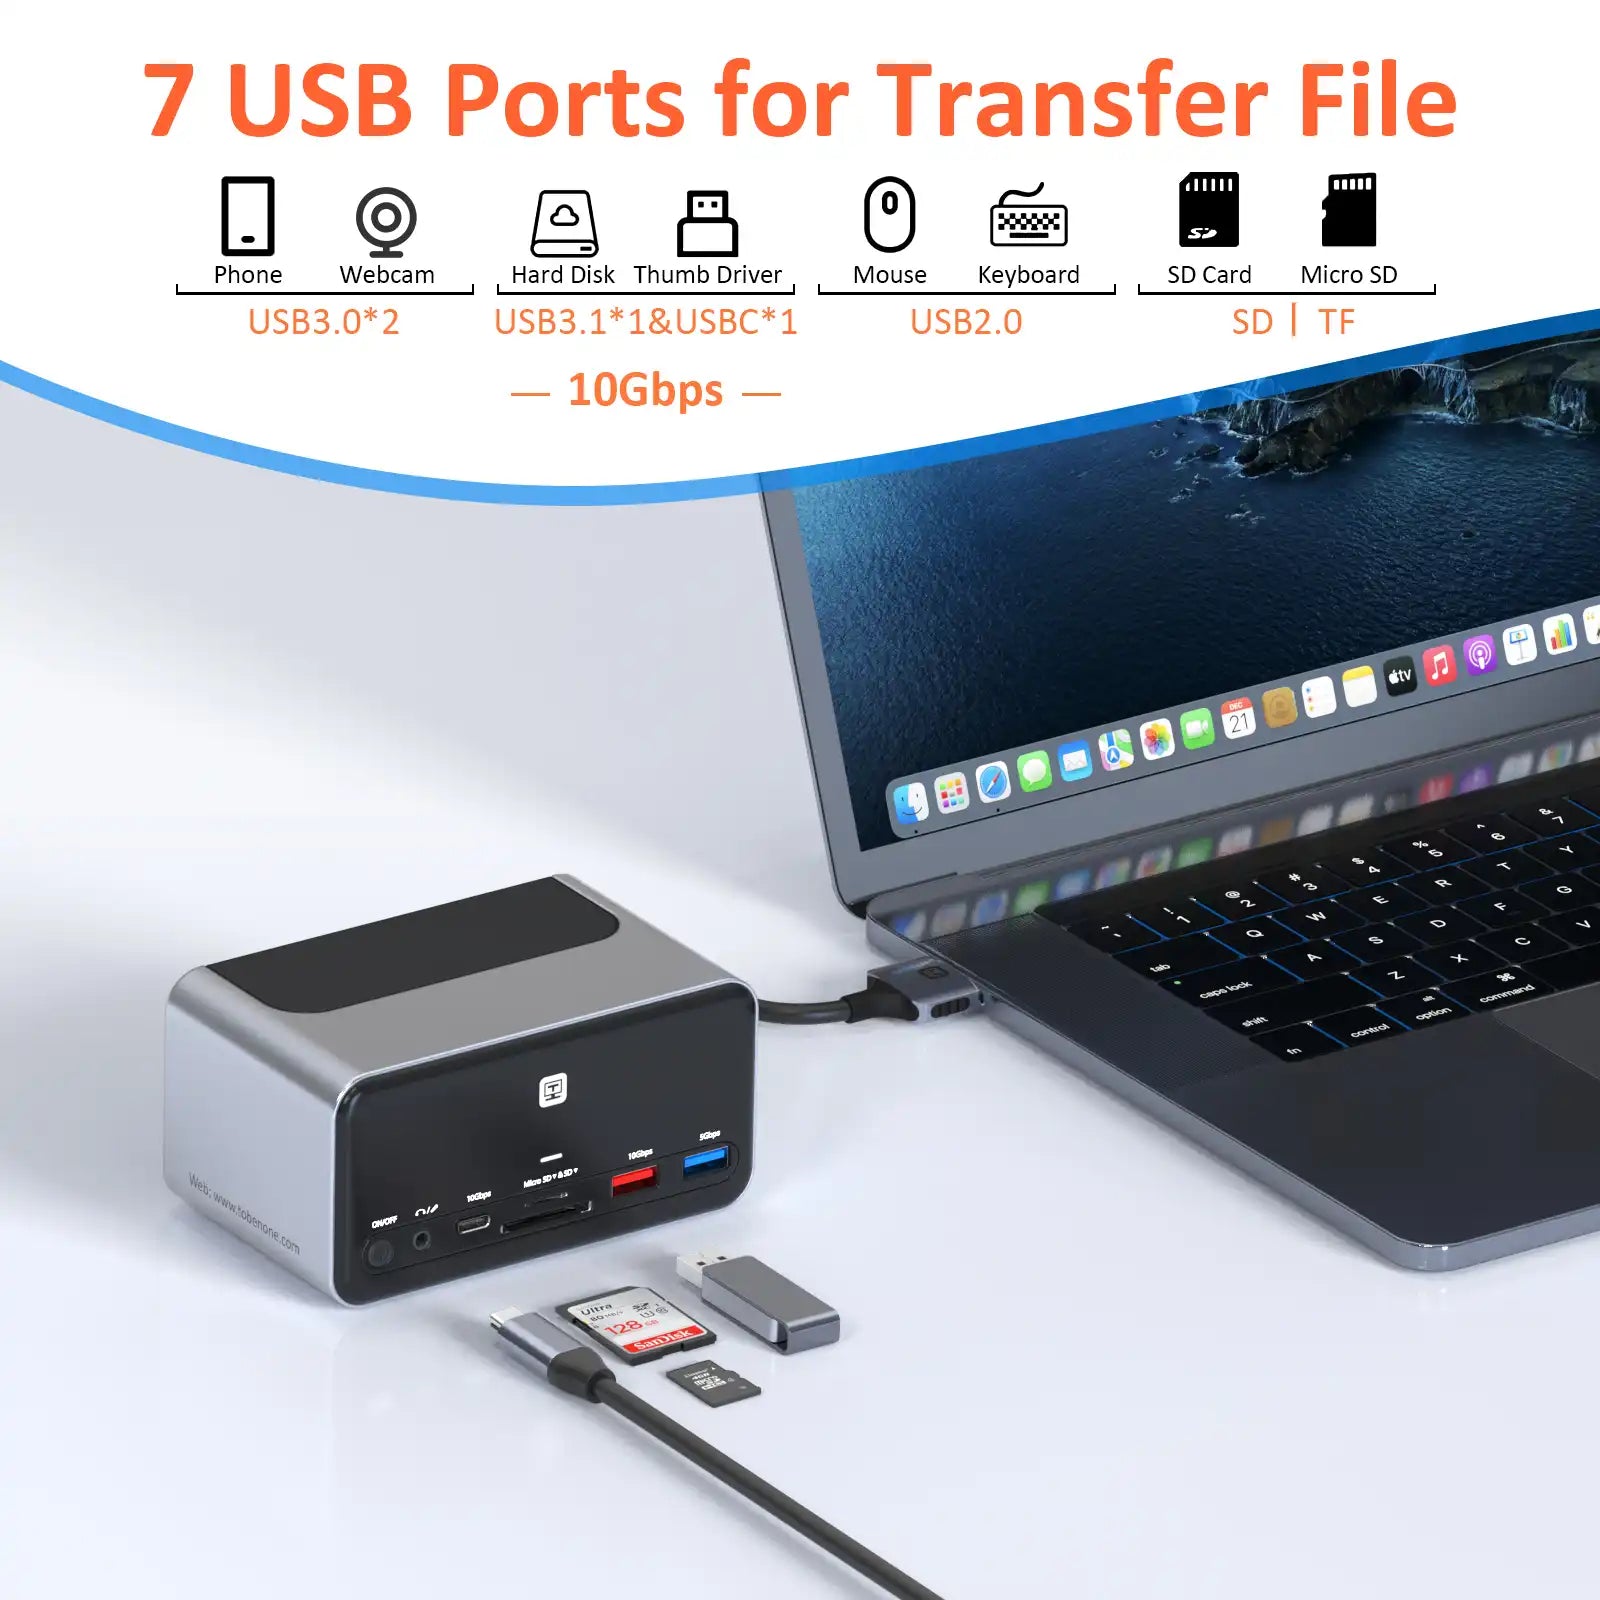 apple dual monitor docking station 7USB ports for transfer file